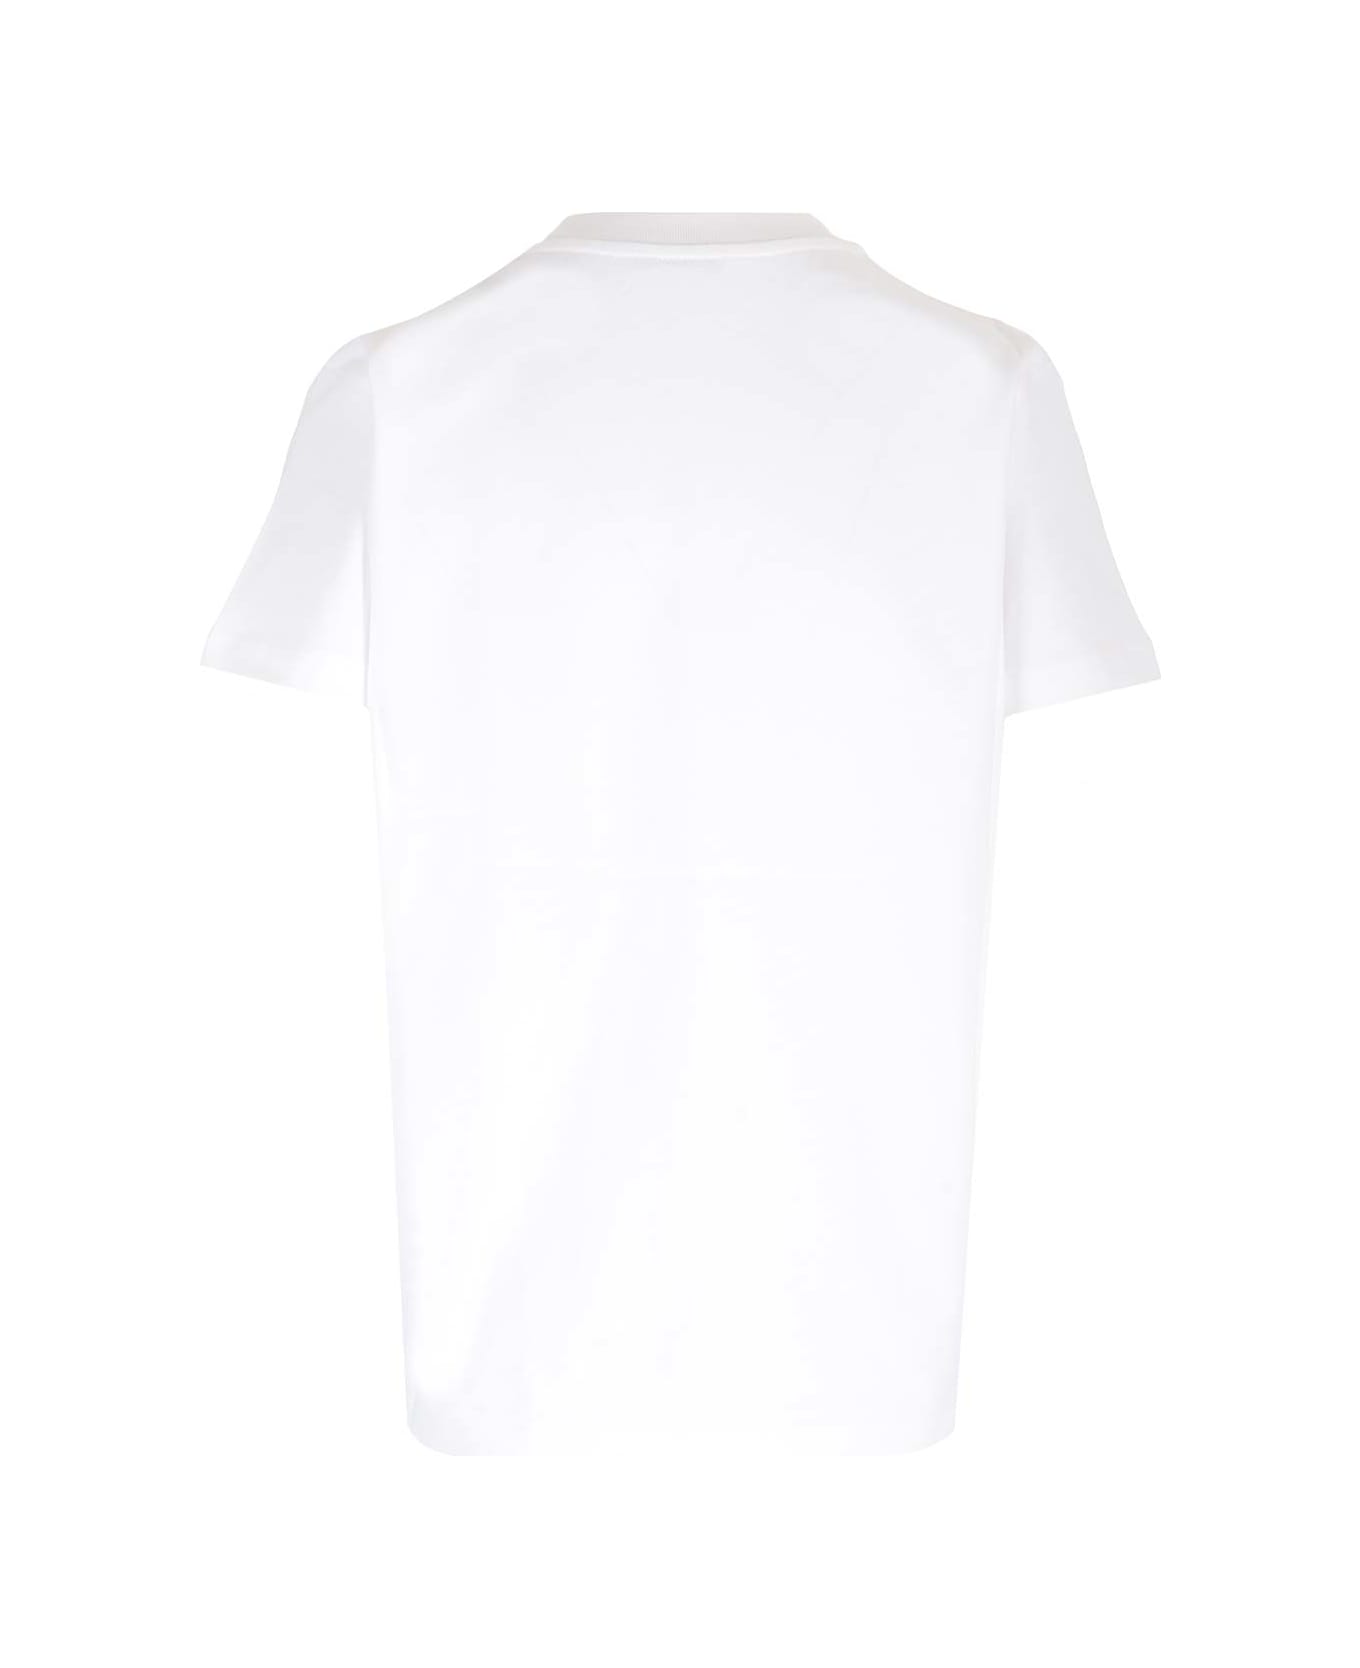 Moncler Embroidered T-shirt - White